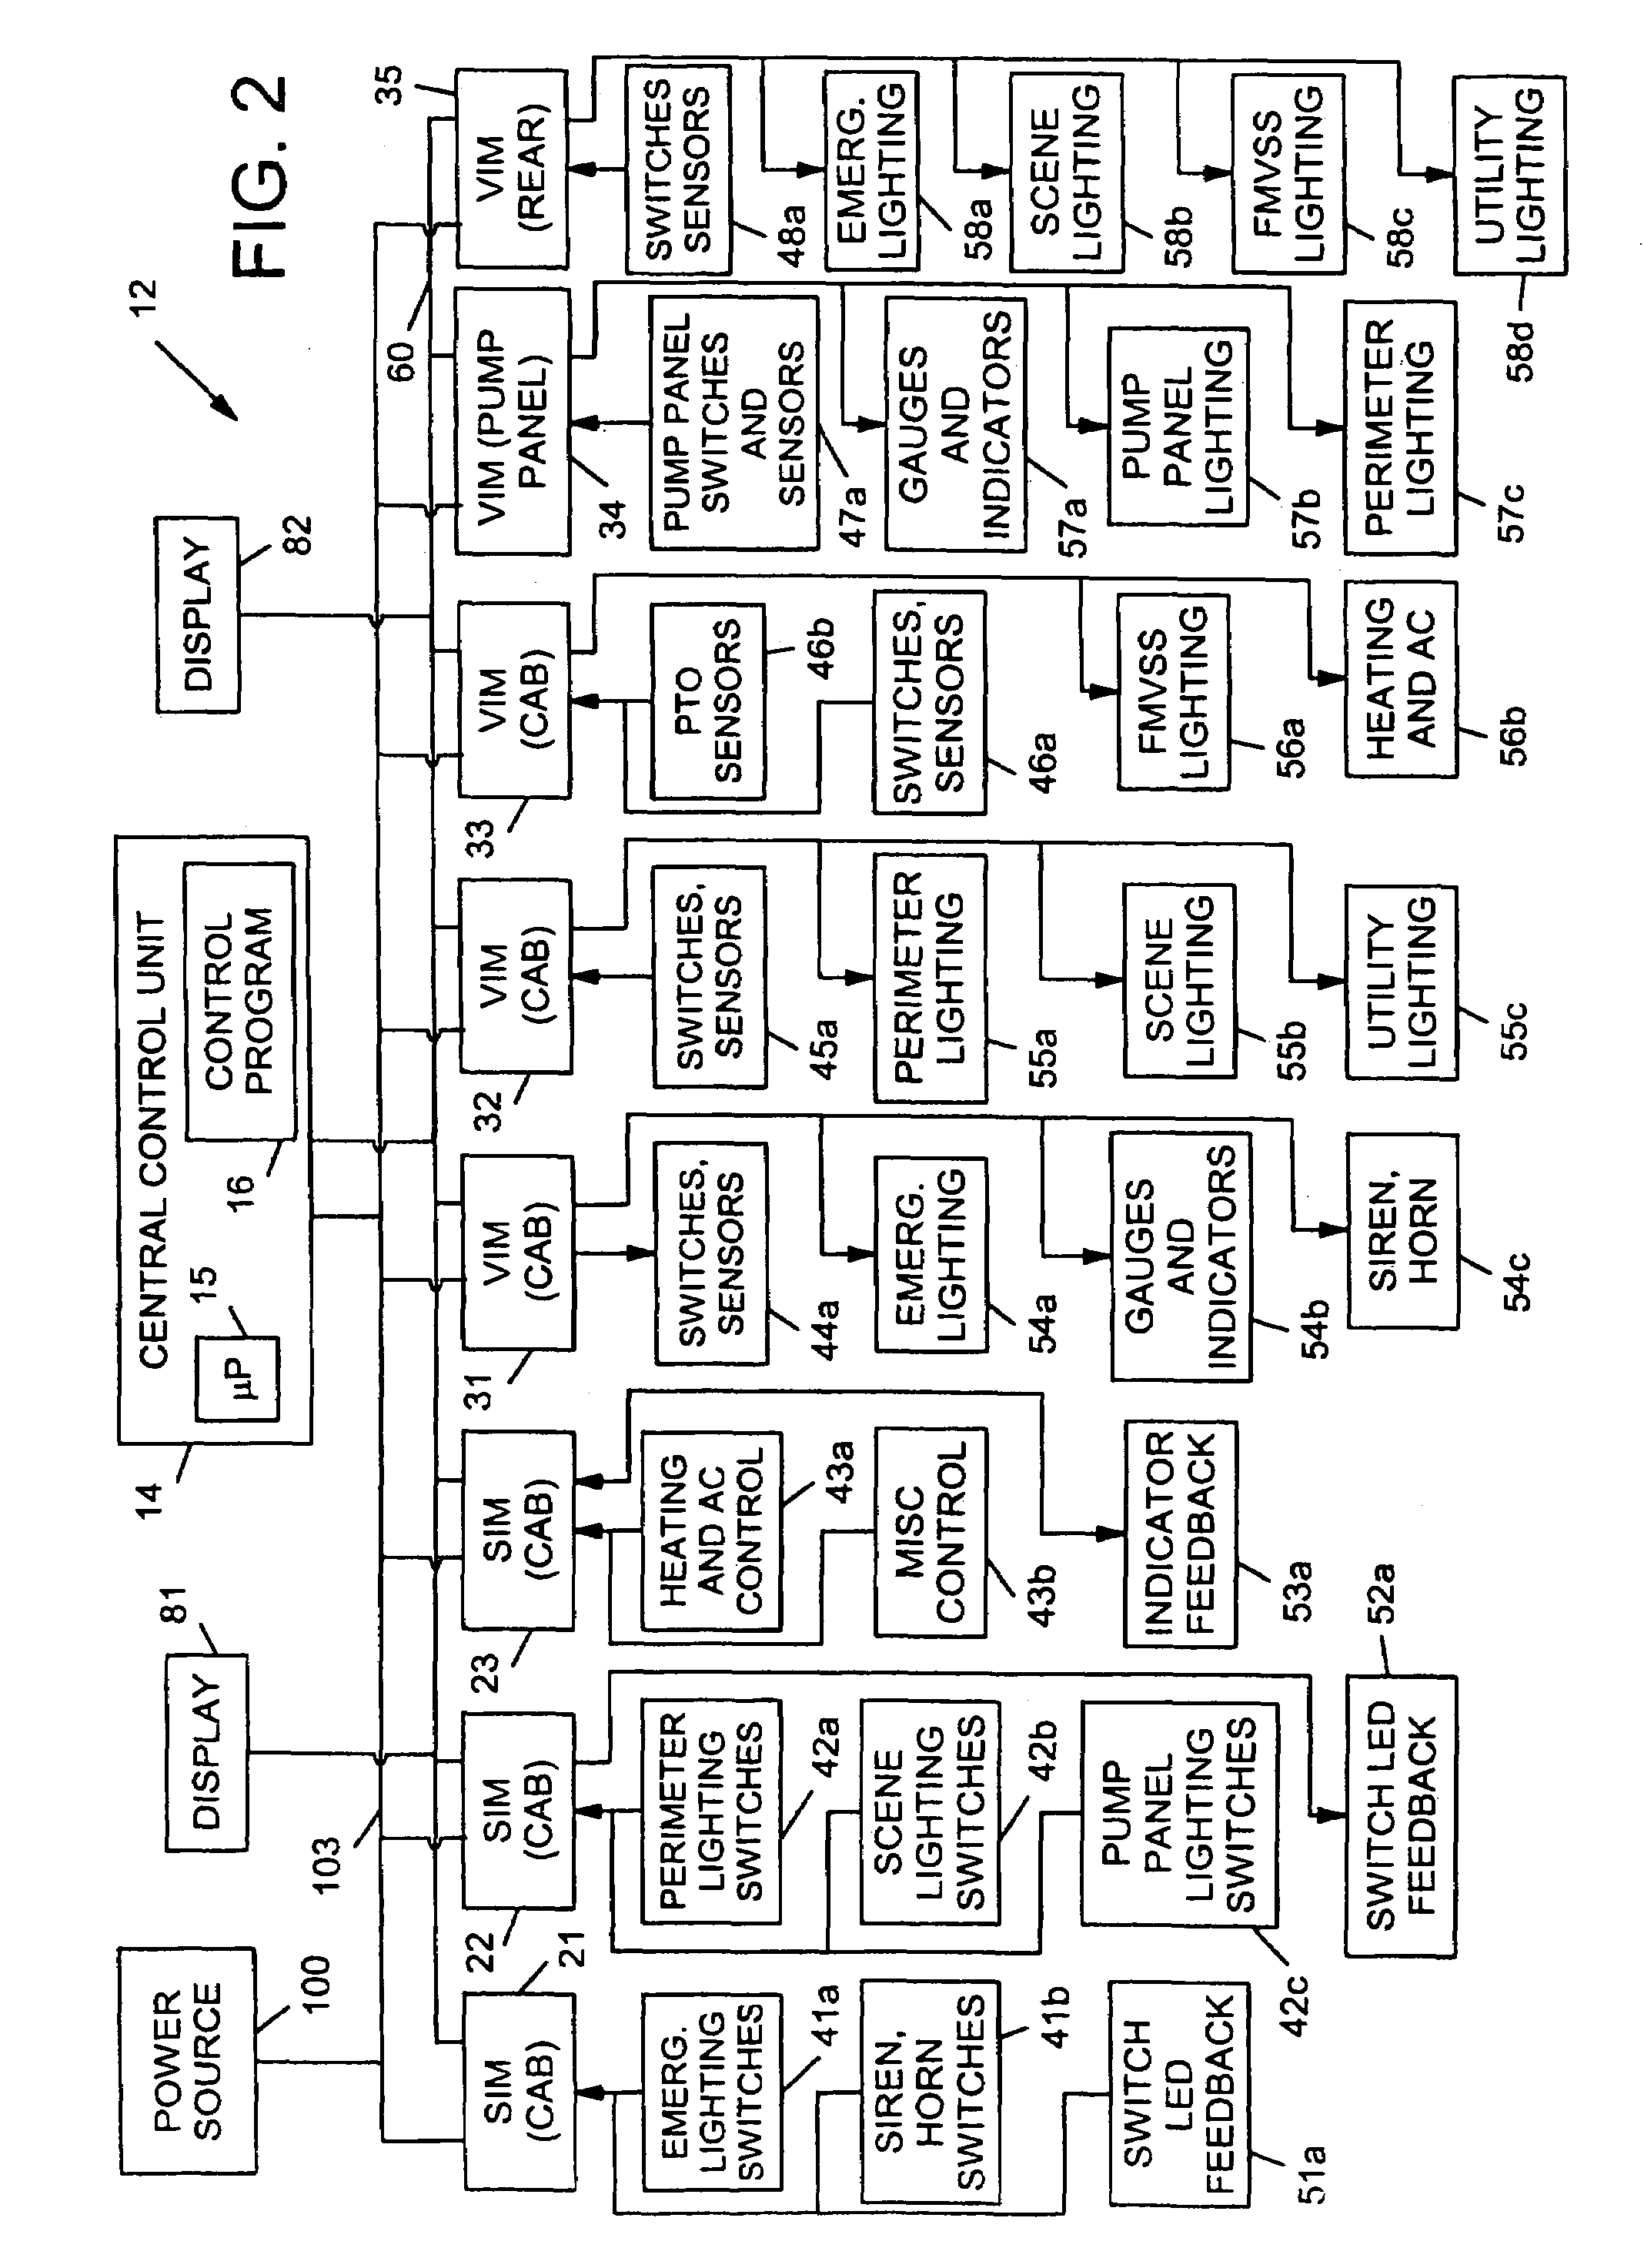 Turret control system based on stored position for a fire fighting vehicle